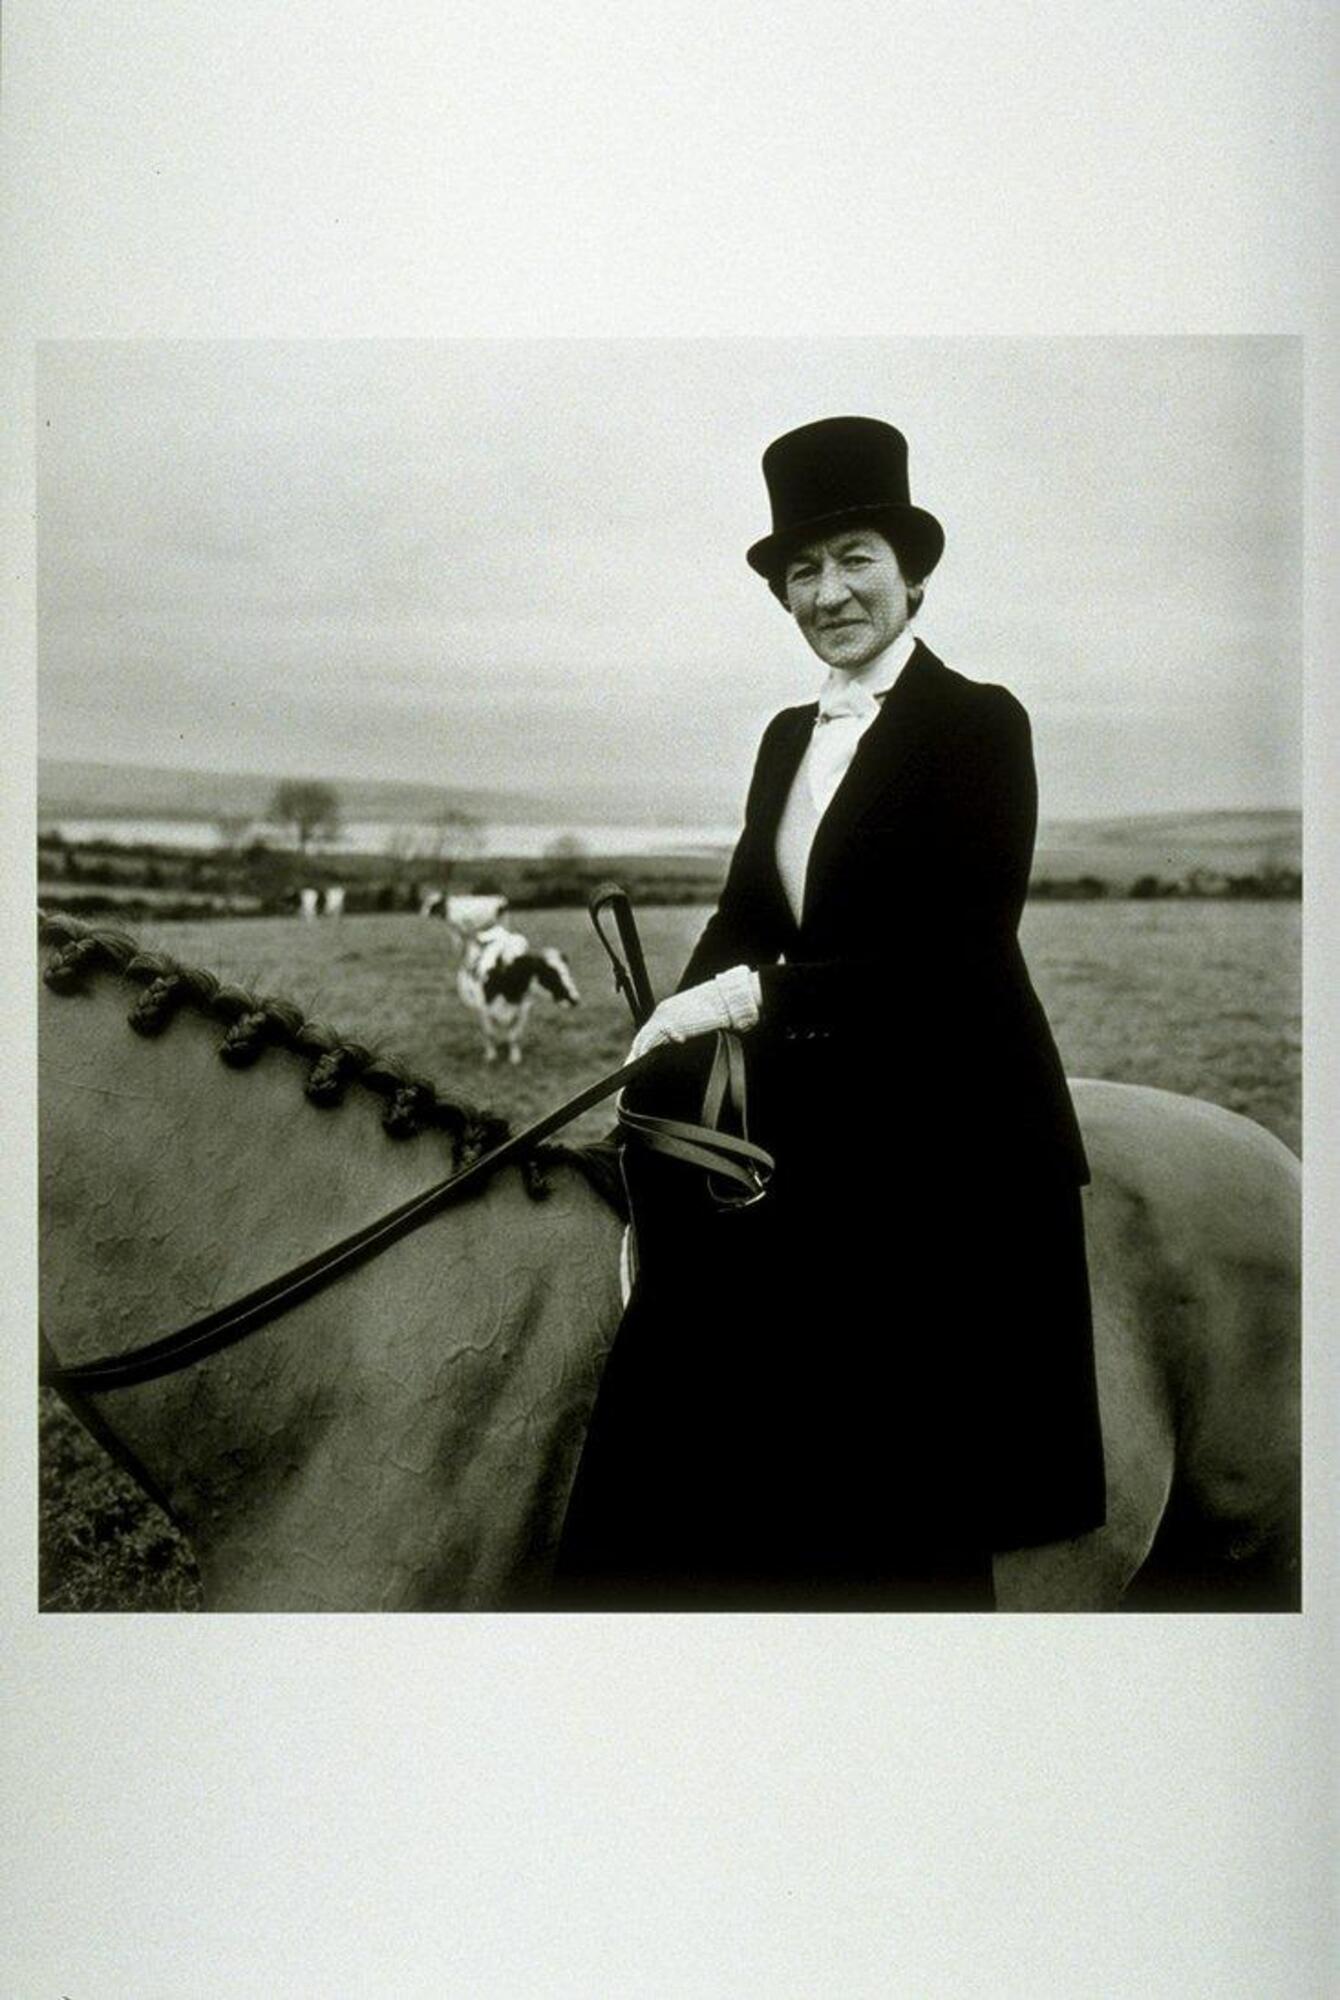 This photograph depicts an elegantly dressed woman on top of a horse in a rural setting.